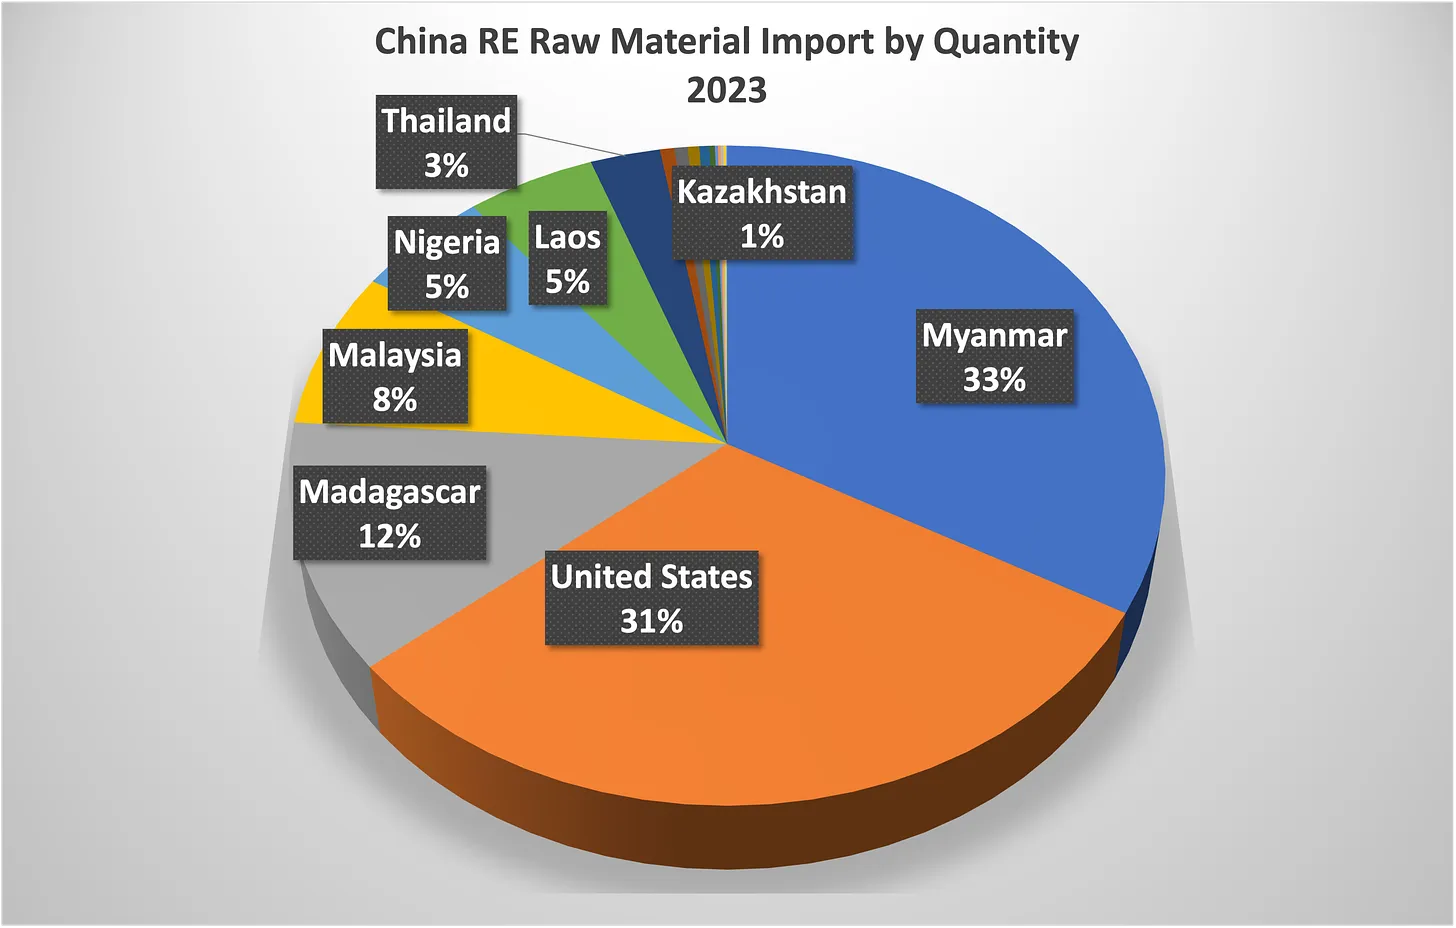 2023 RE Imports by Quantity